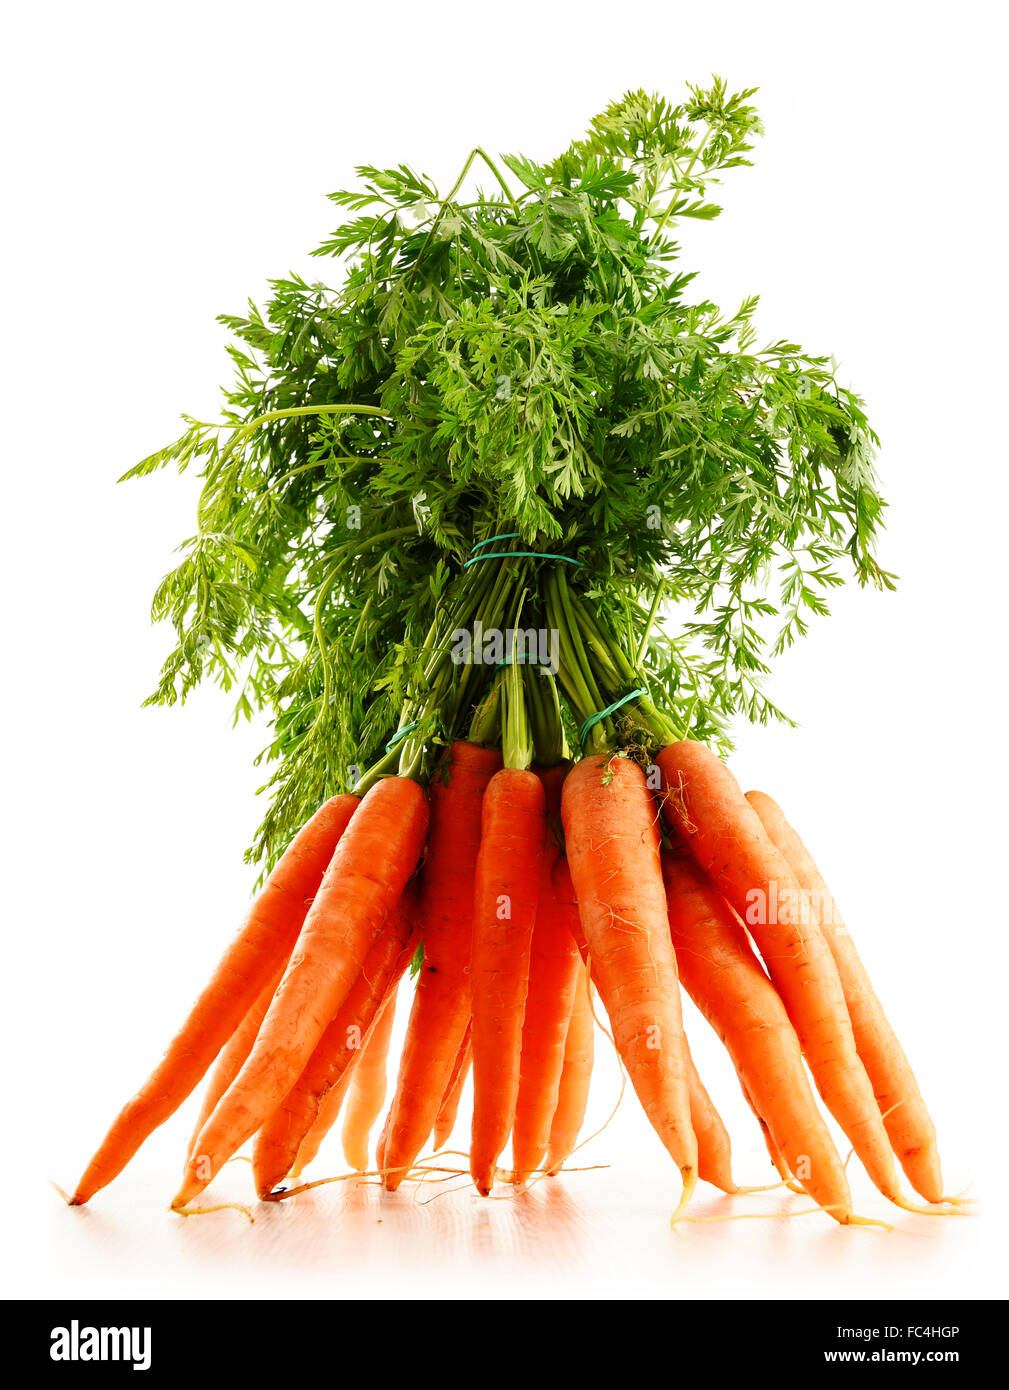 Fresh carrots bunch isolated on white background Stock Photo